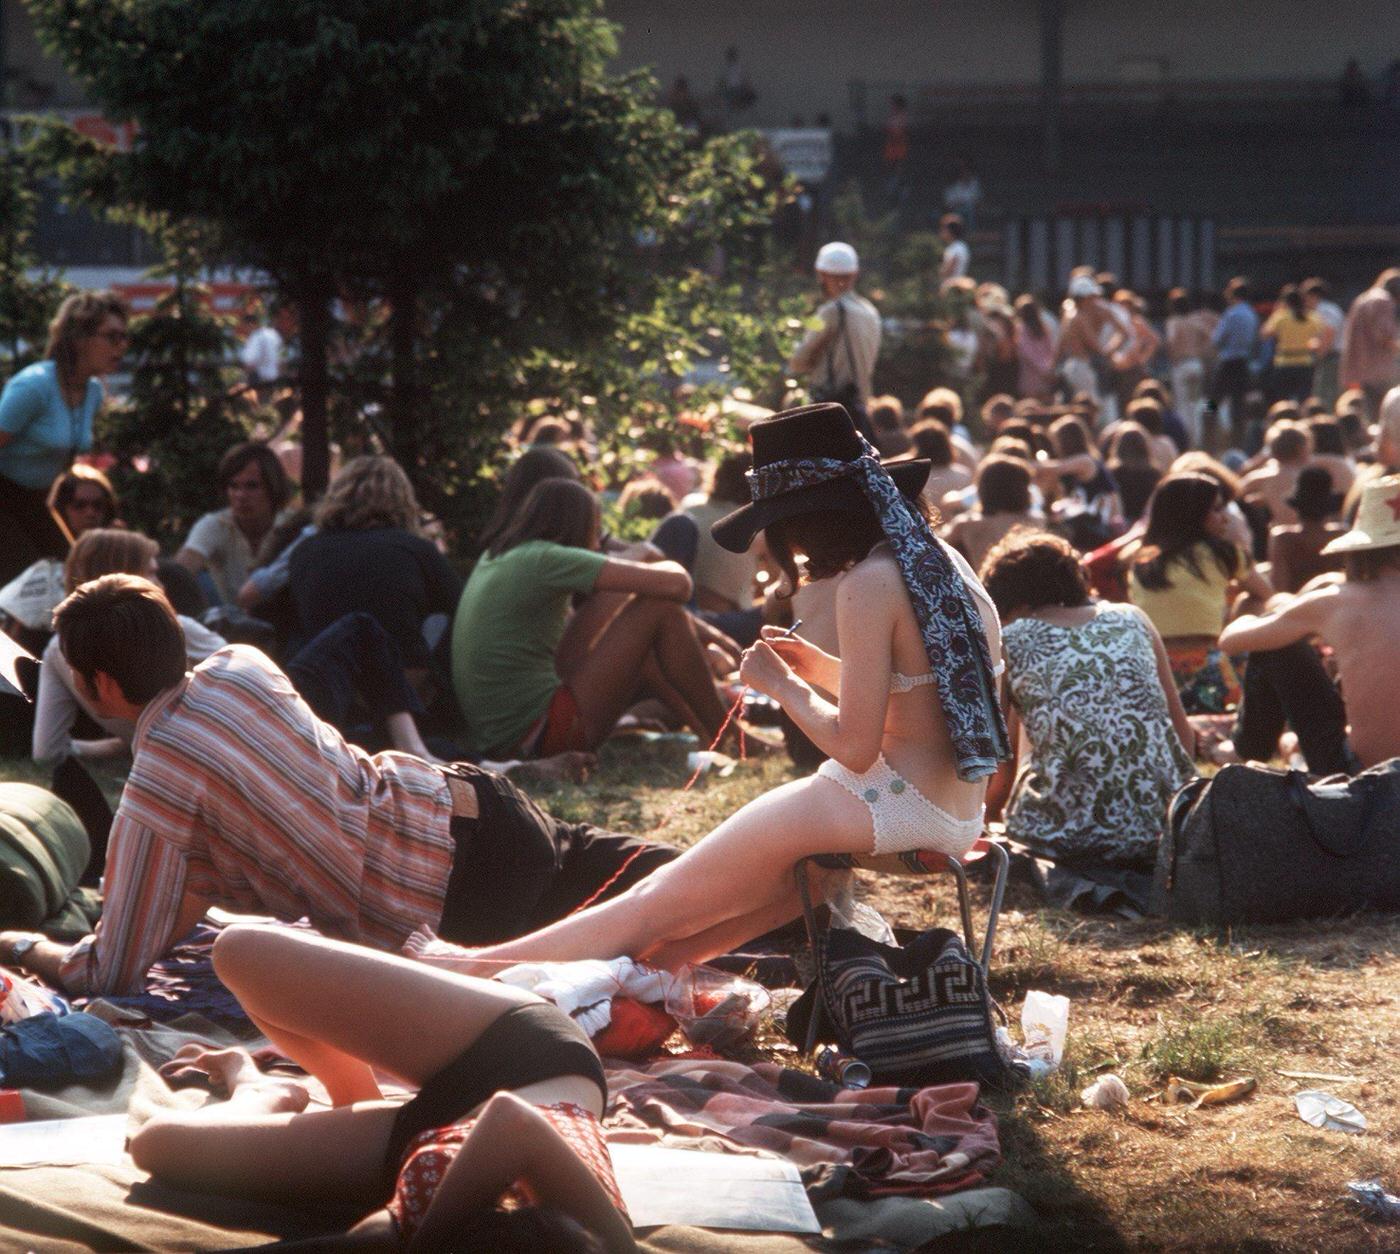 What Hamburg, Germany, looked like in the 1970s